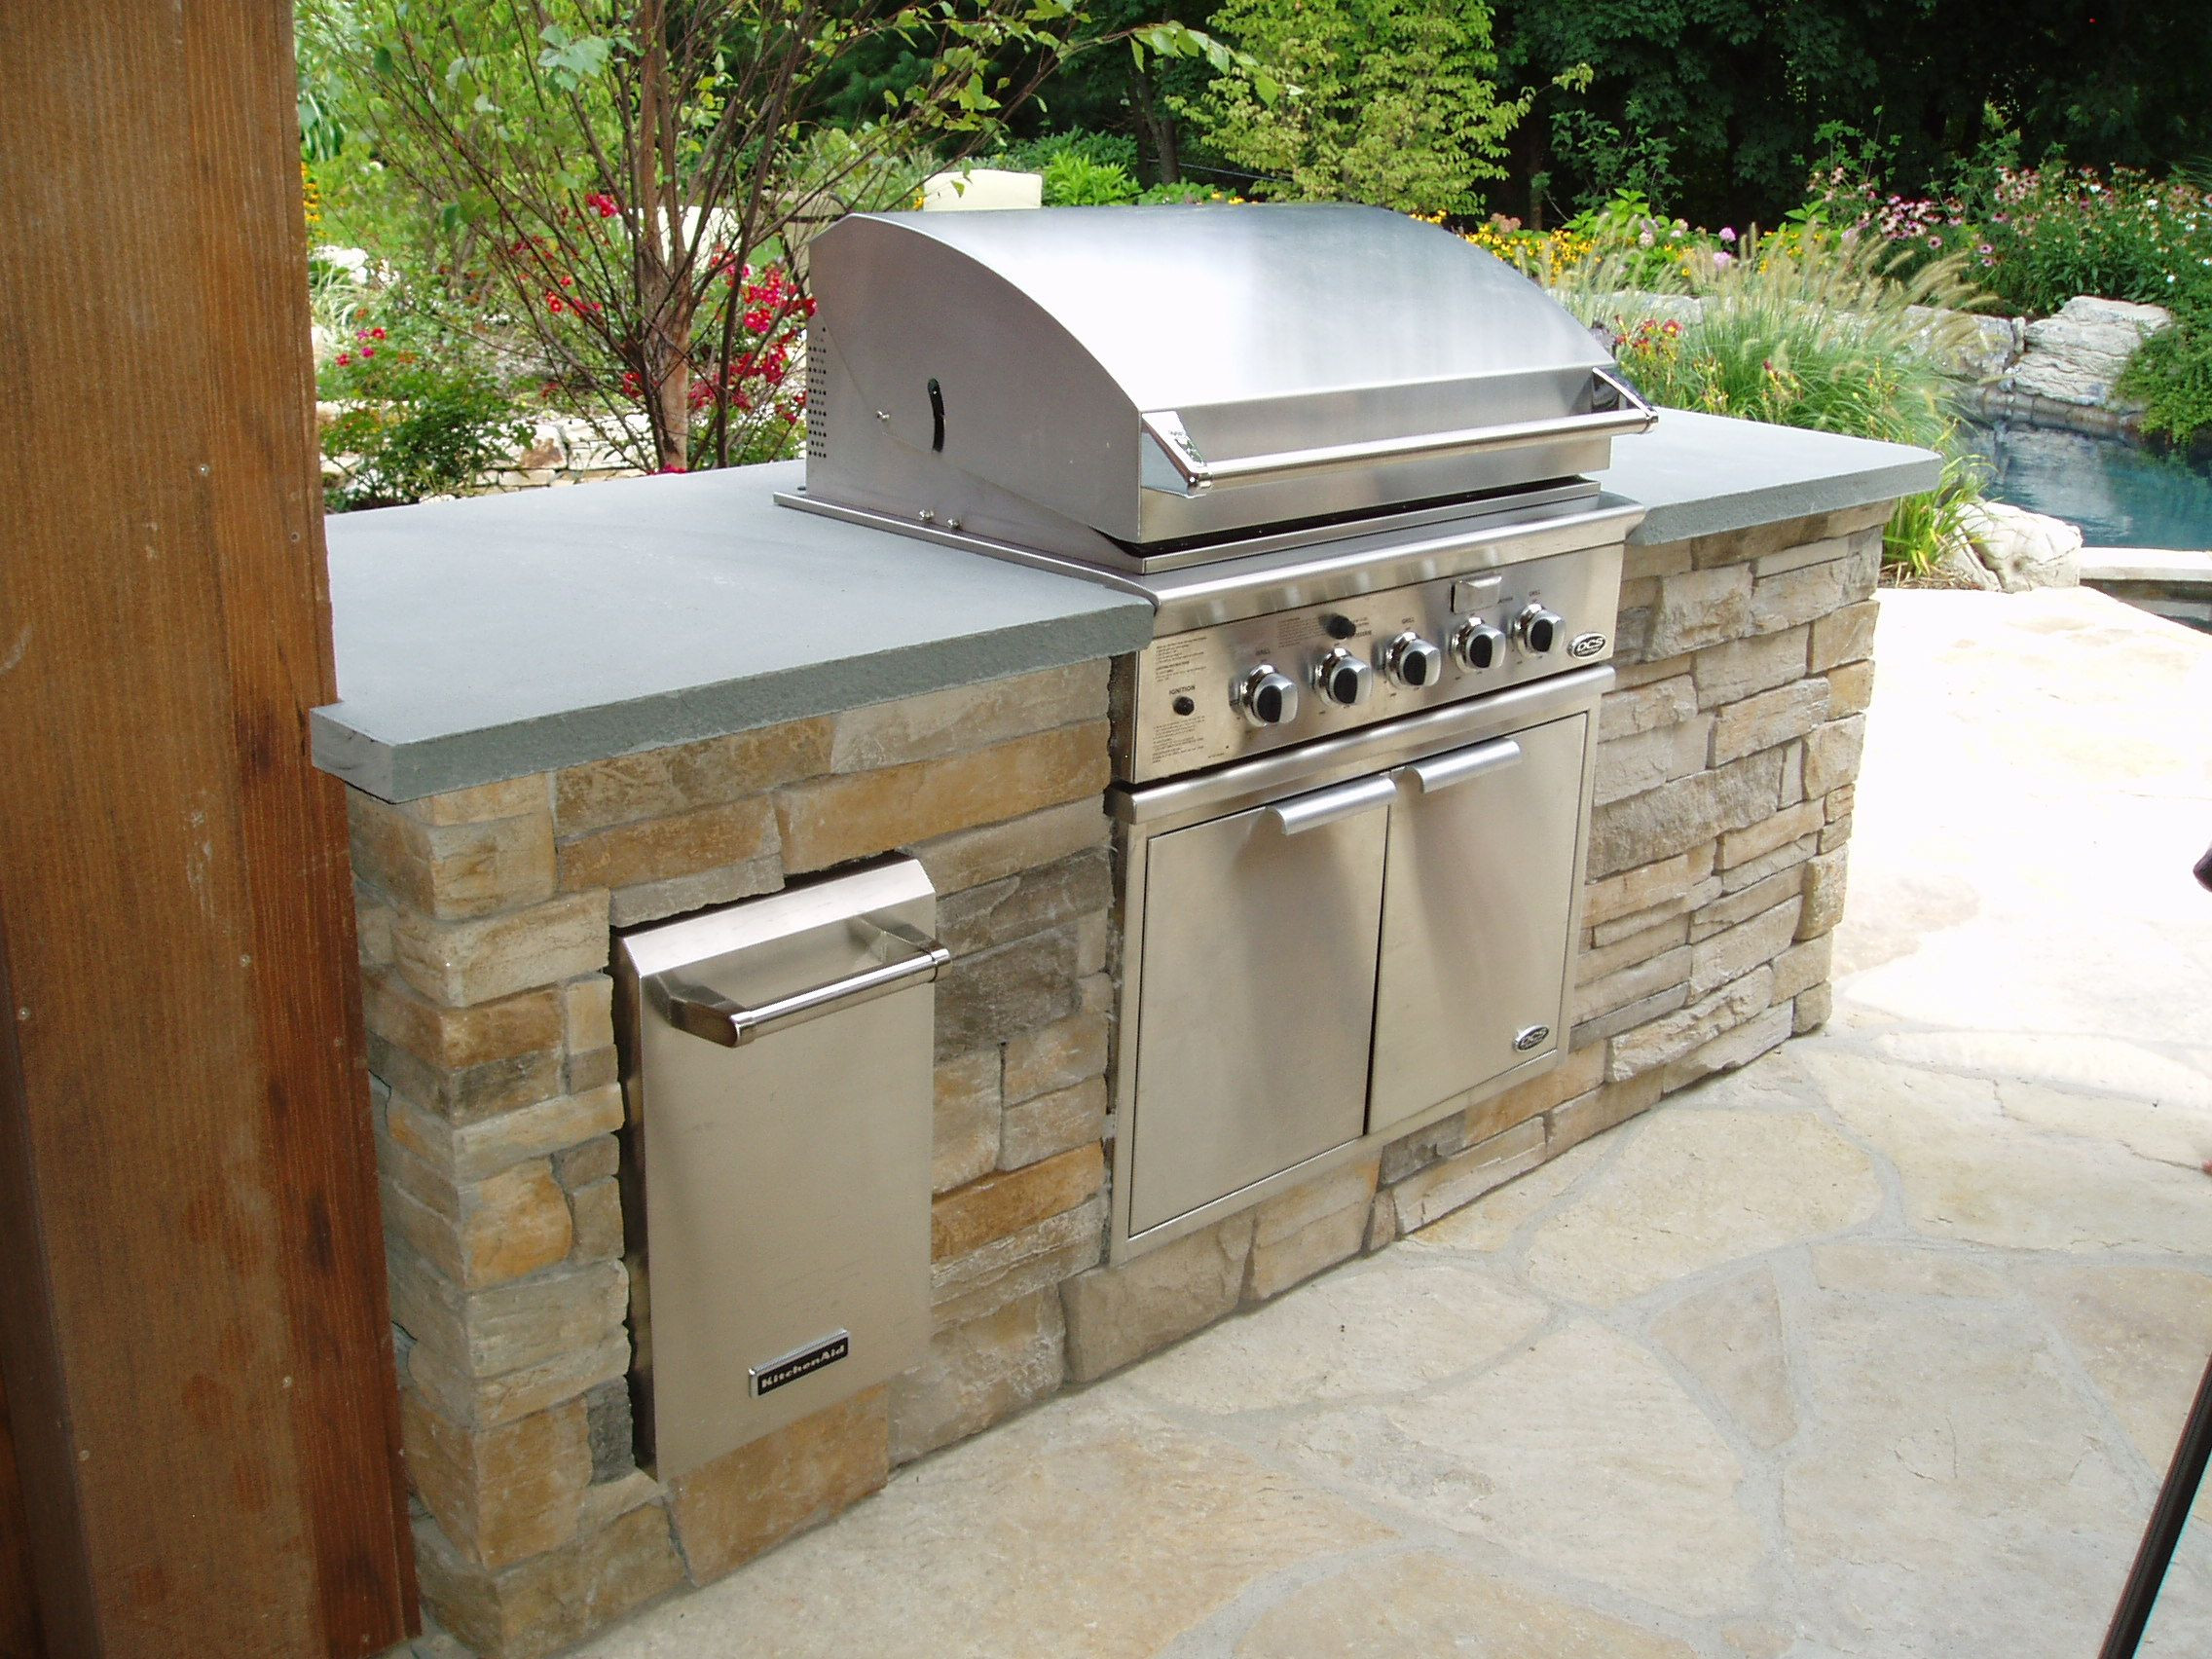 Outdoor Bbq Kitchen
 Outdoor Kitchen Grill Find Grill & Outdoor Cooking is very